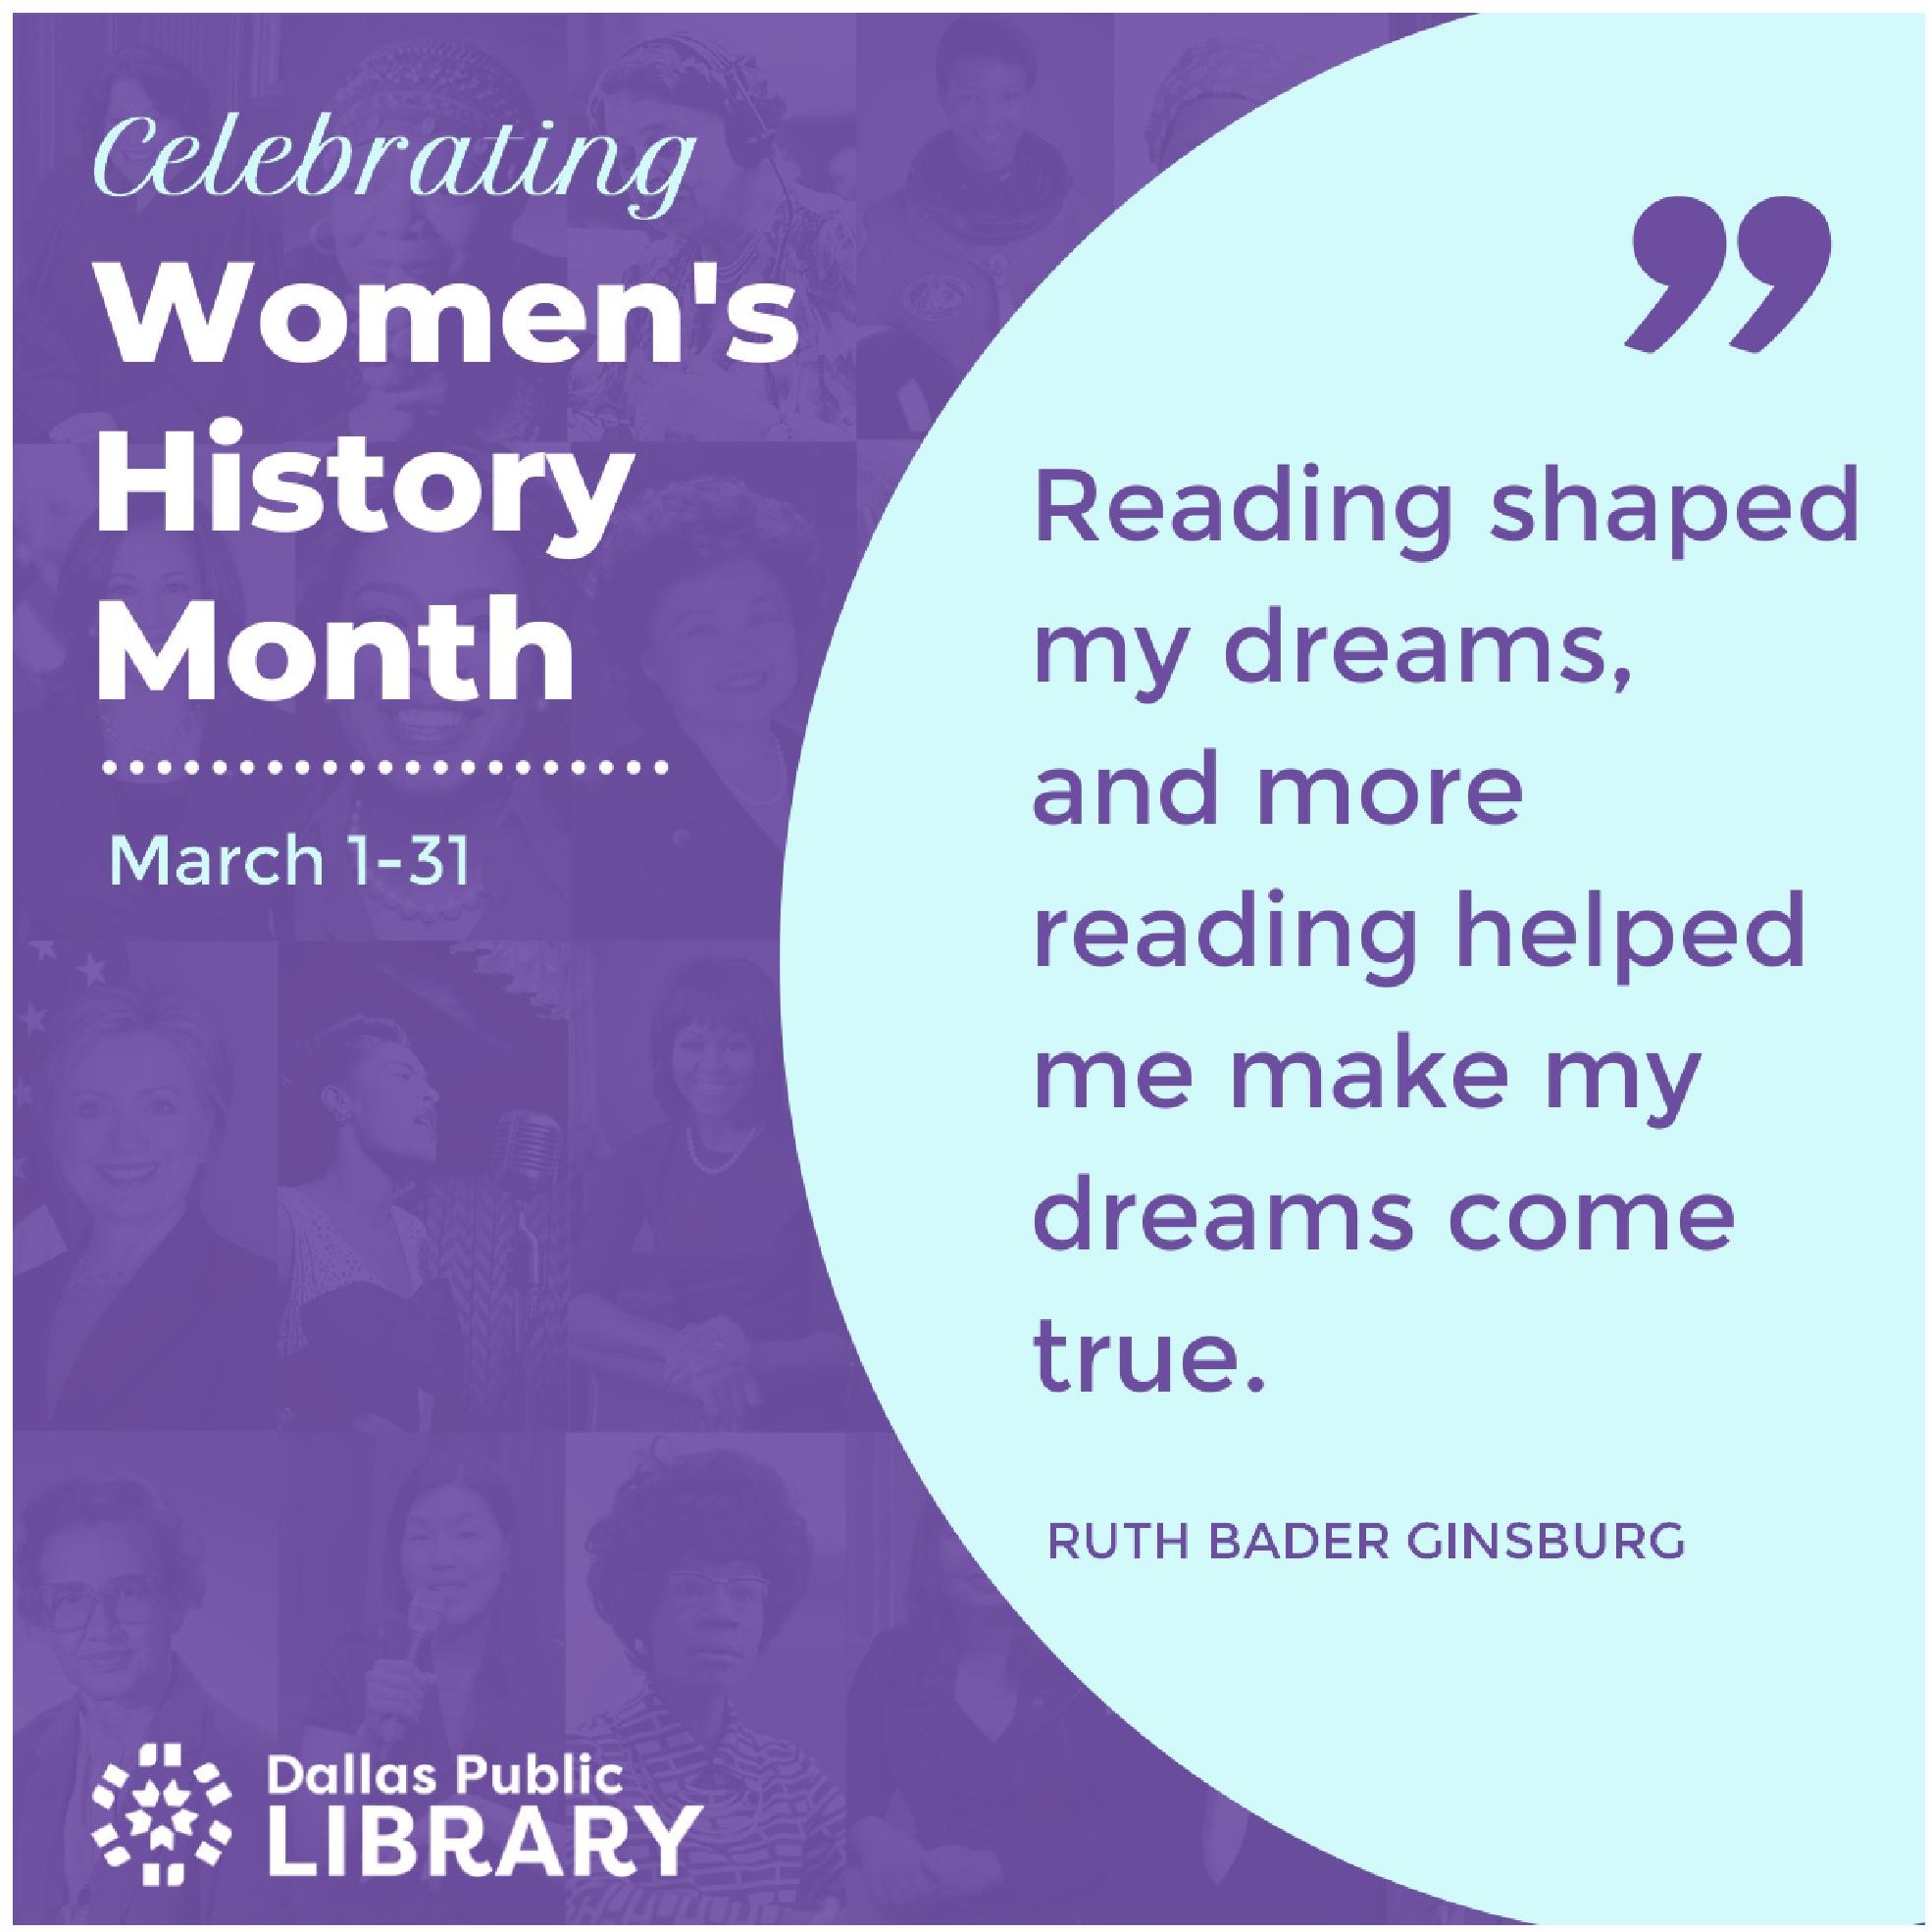 Background: purple, with transparent portraits of famous women. "Celebrating Women's History Month, March 1-31" on the left. On the right, on a light blue half-circle is a quotation from Ruth Bader Ginsburg: "Reading shaped my dreams, and more reading helped me make my dreams come true."